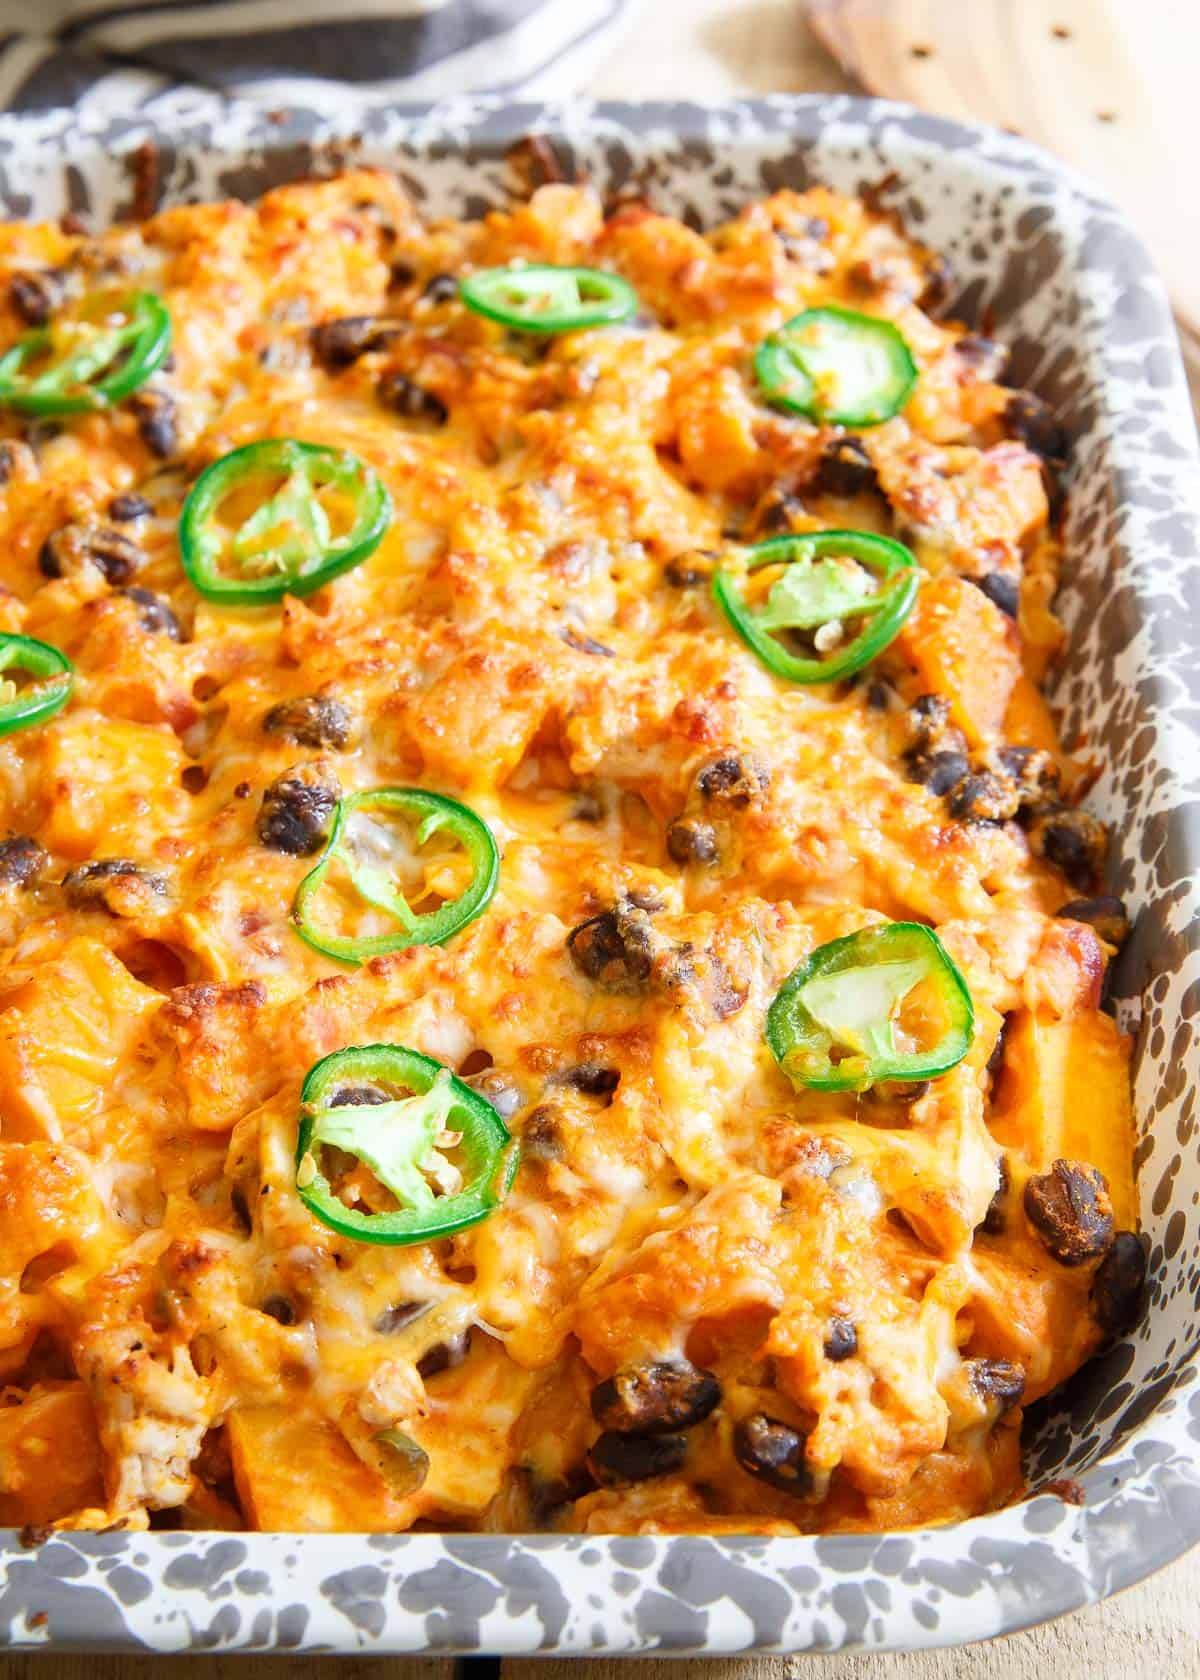 This gluten free pumpkin tortilla casserole is creamy and cheesy with just a little hint of spice. A great fall meal the whole family will love!